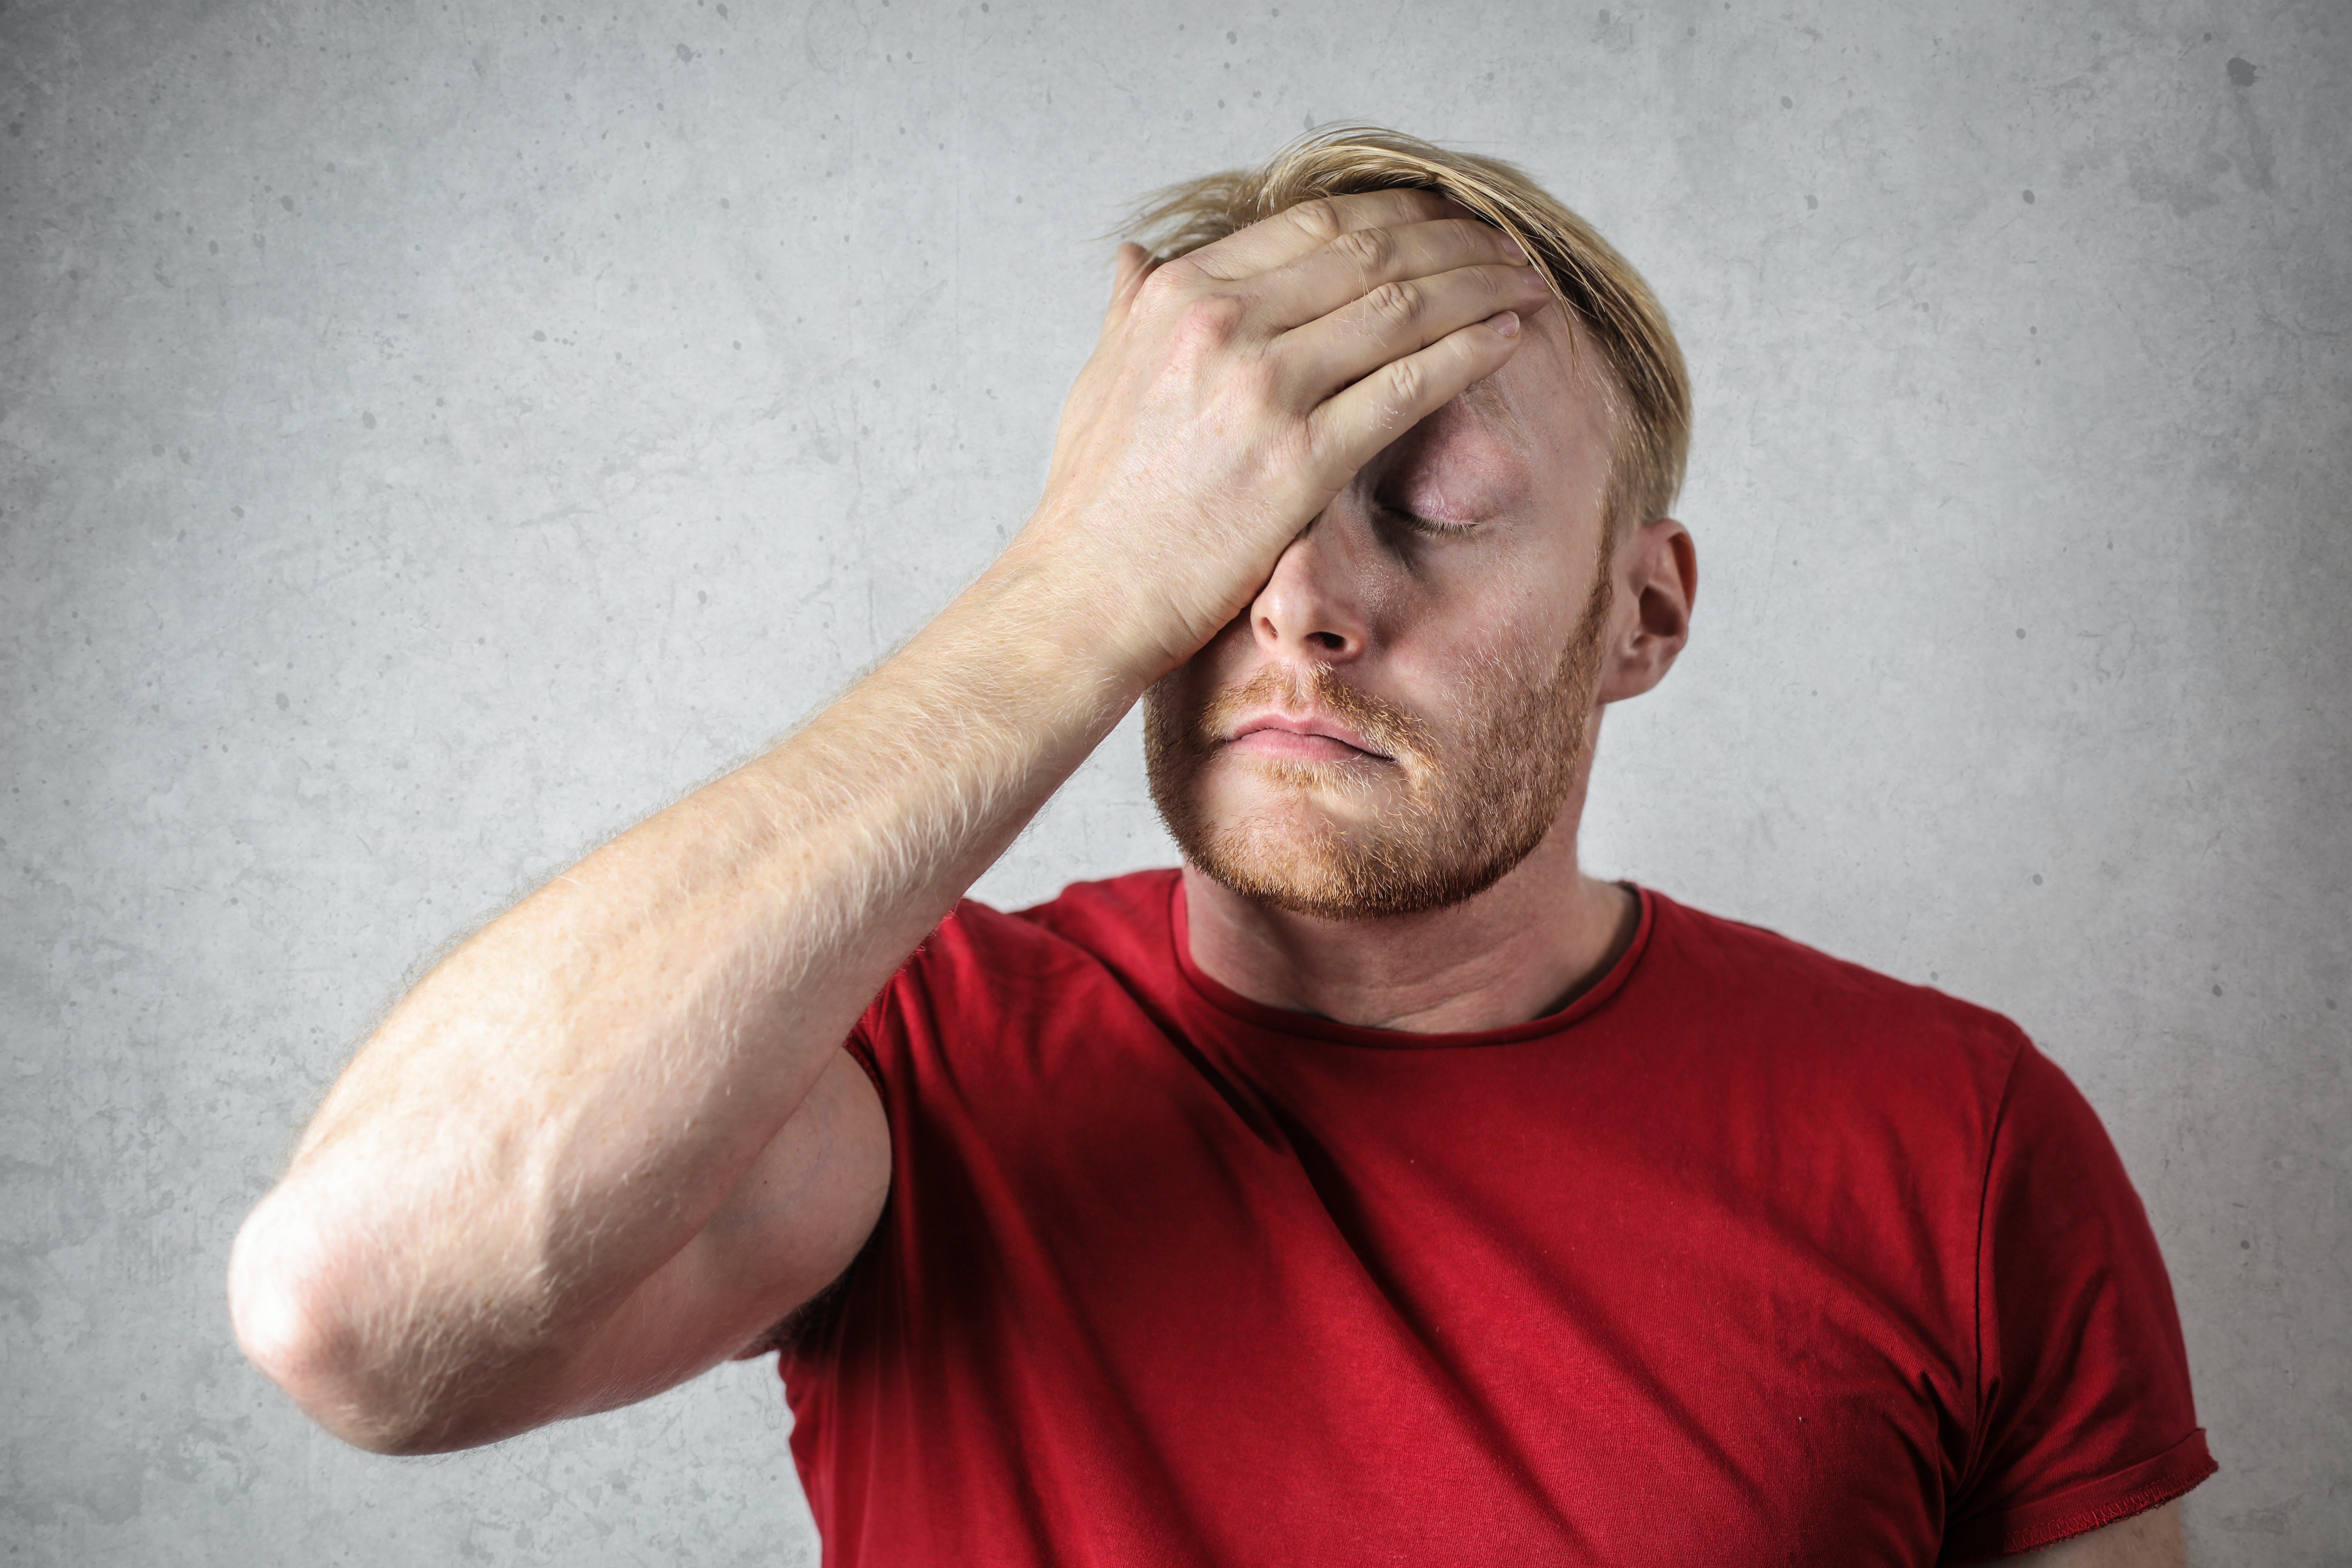 A stressed-out man with his hand on his face | Source: Pexels